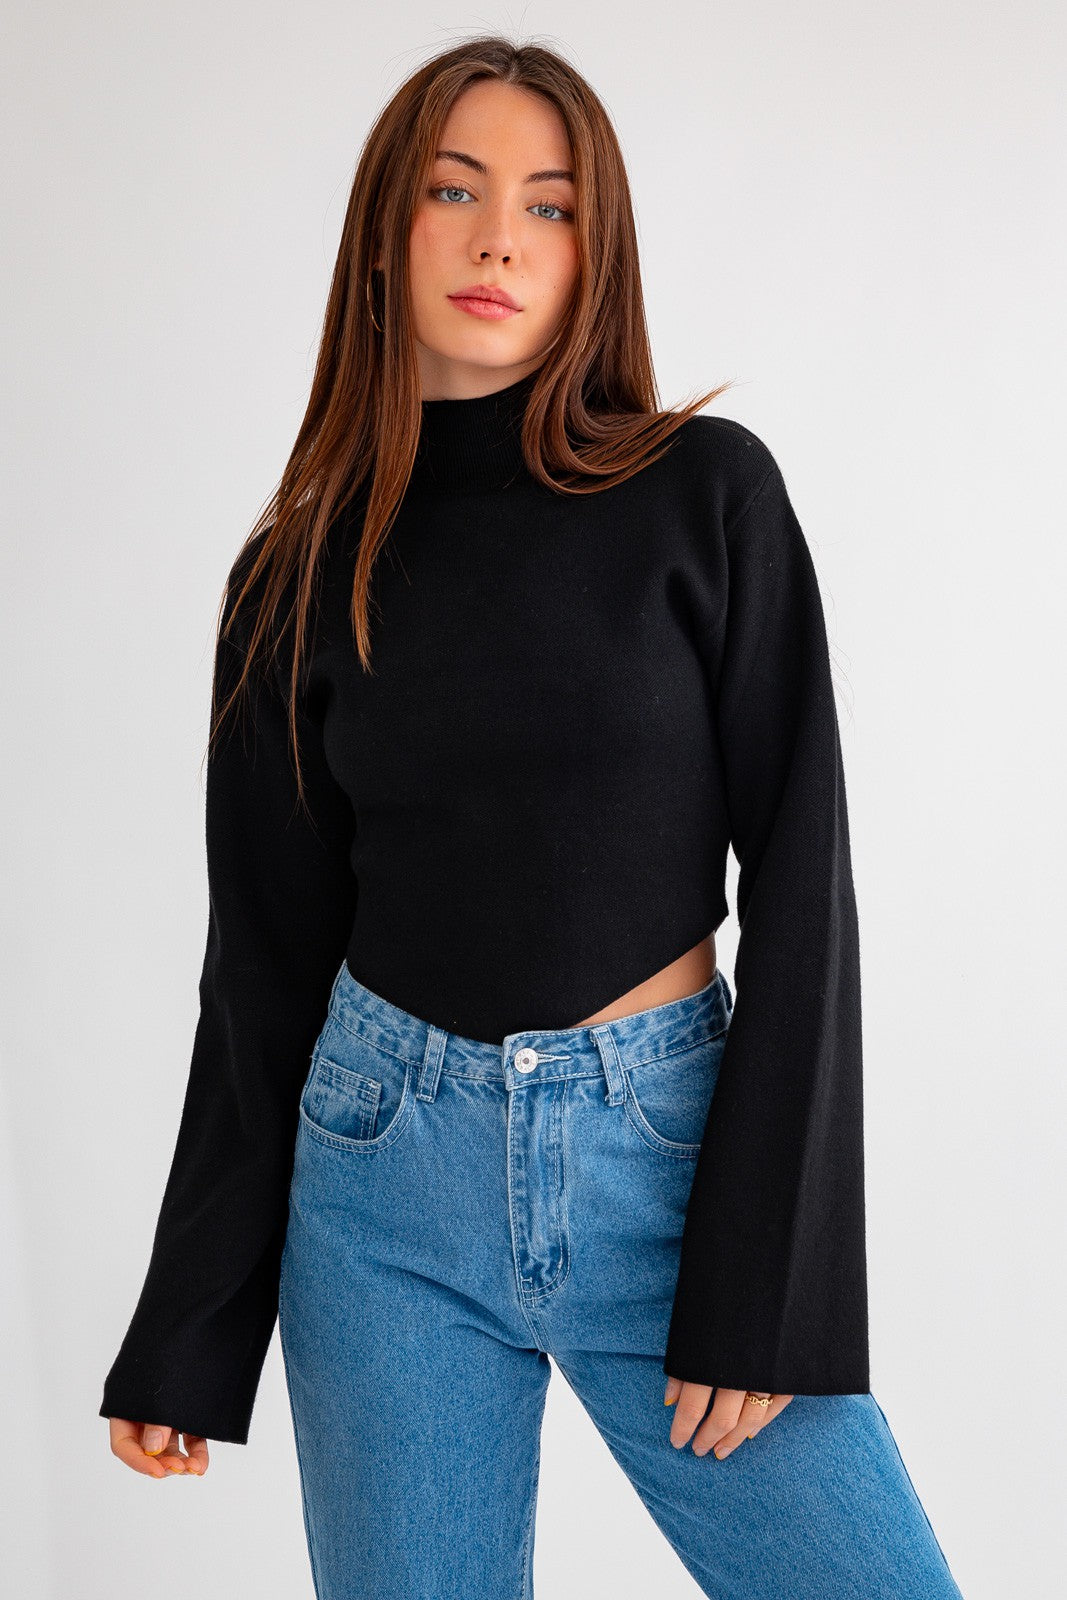 Social Battery Charged Sweater Black, Sweater by Le Lis | LIT Boutique